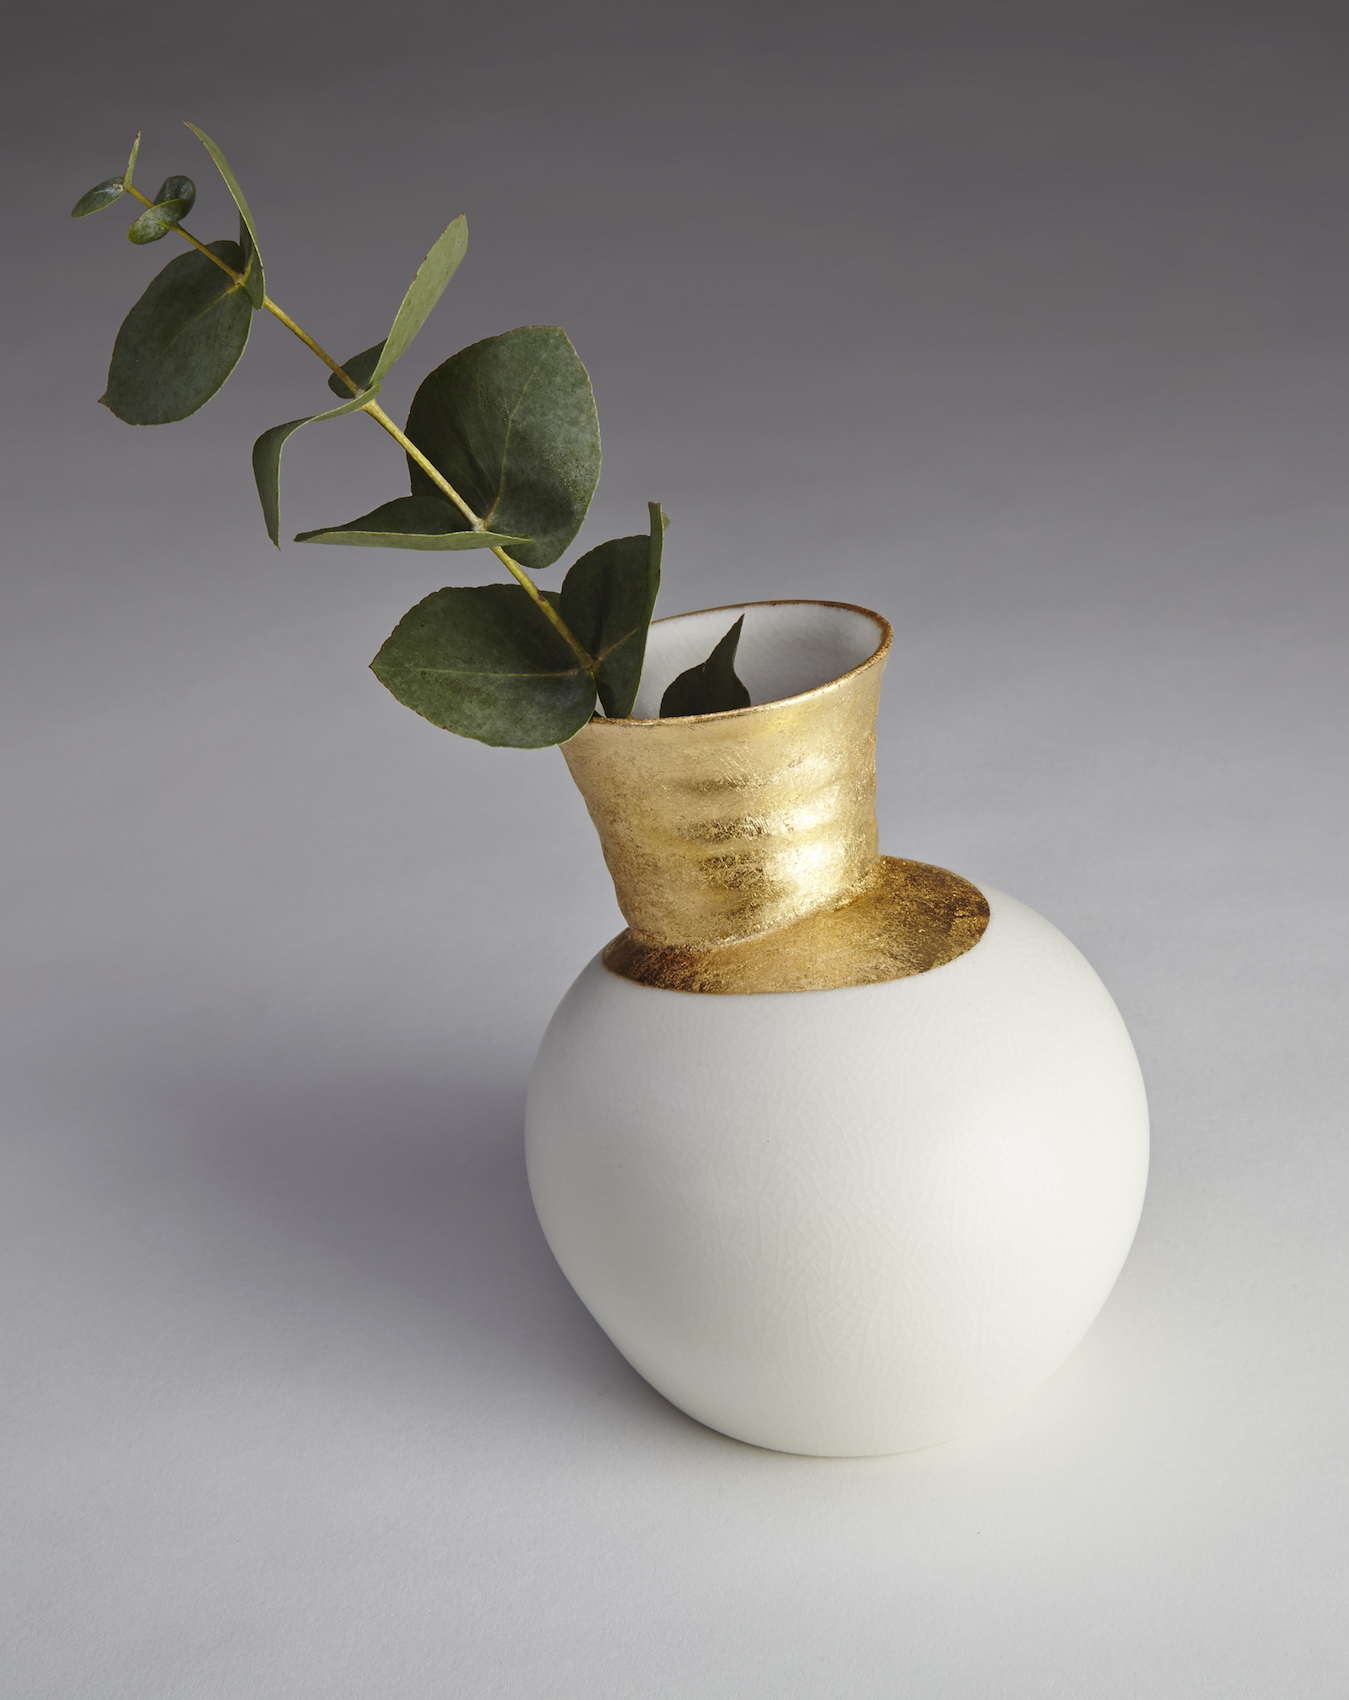 Joe Davies vase with gold accents in Effect Magazine